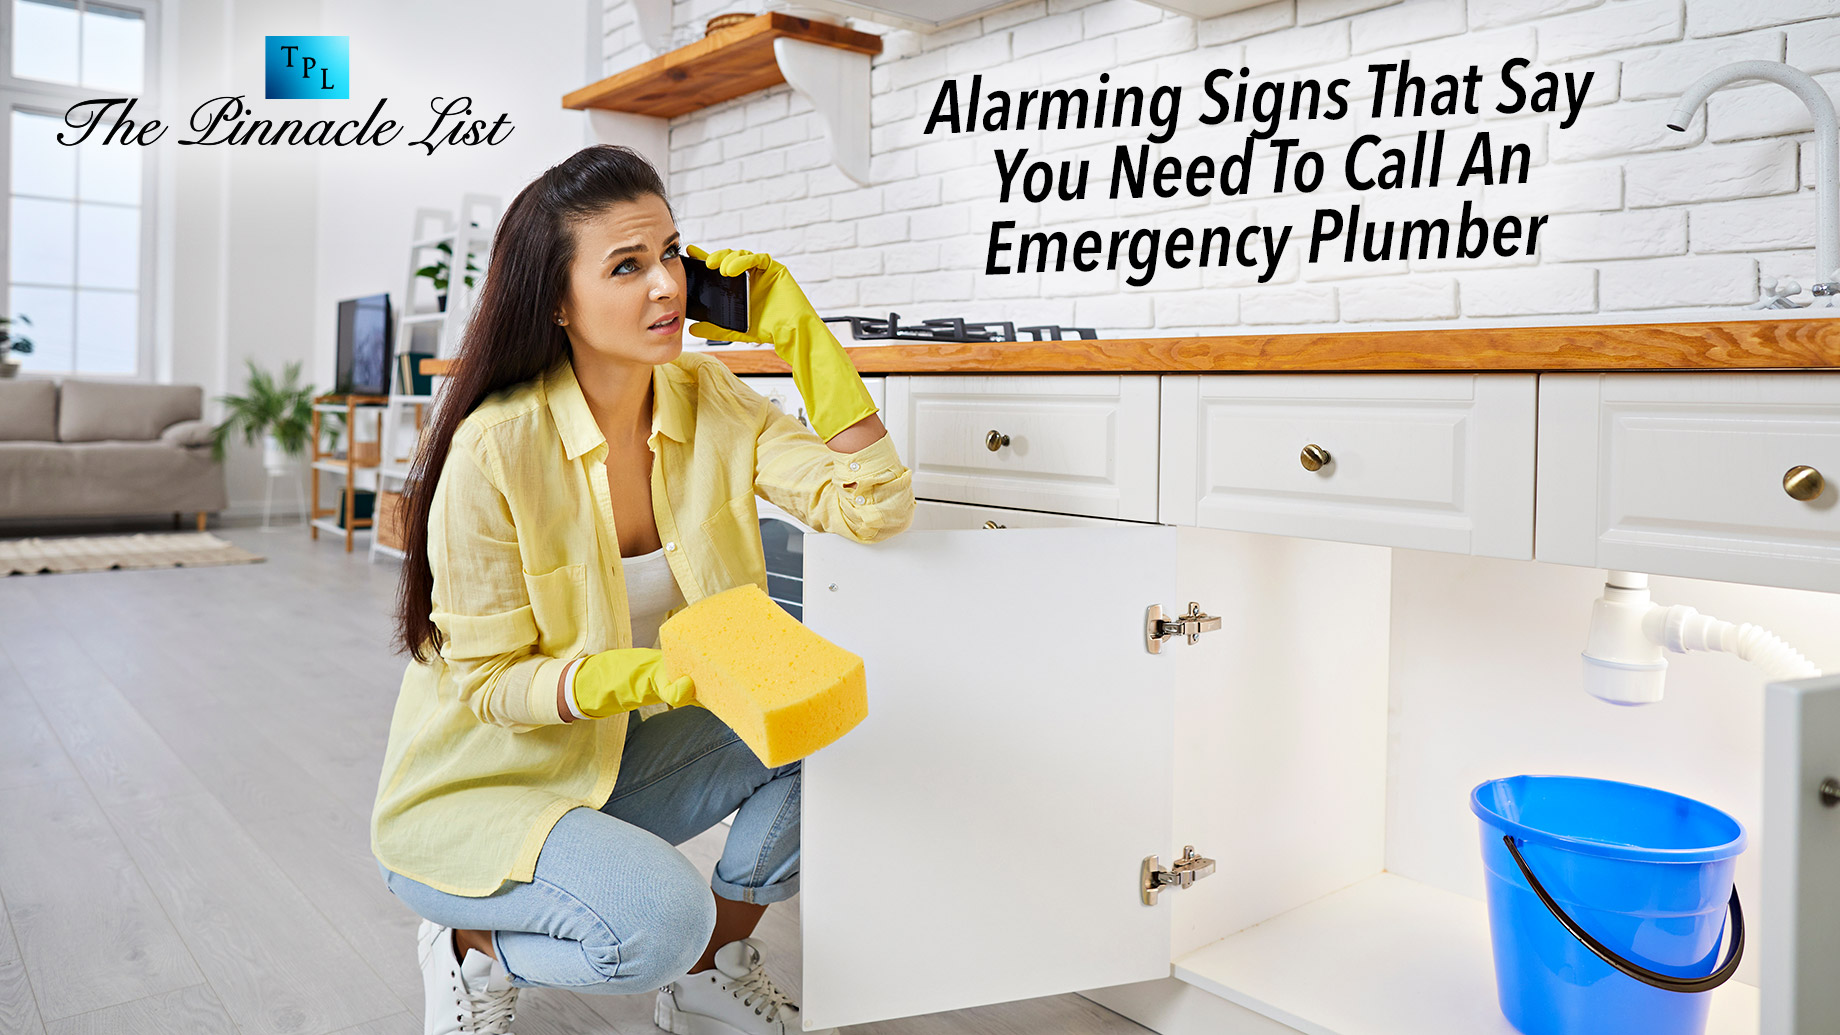 Alarming Signs That Say You Need To Call An Emergency Plumber